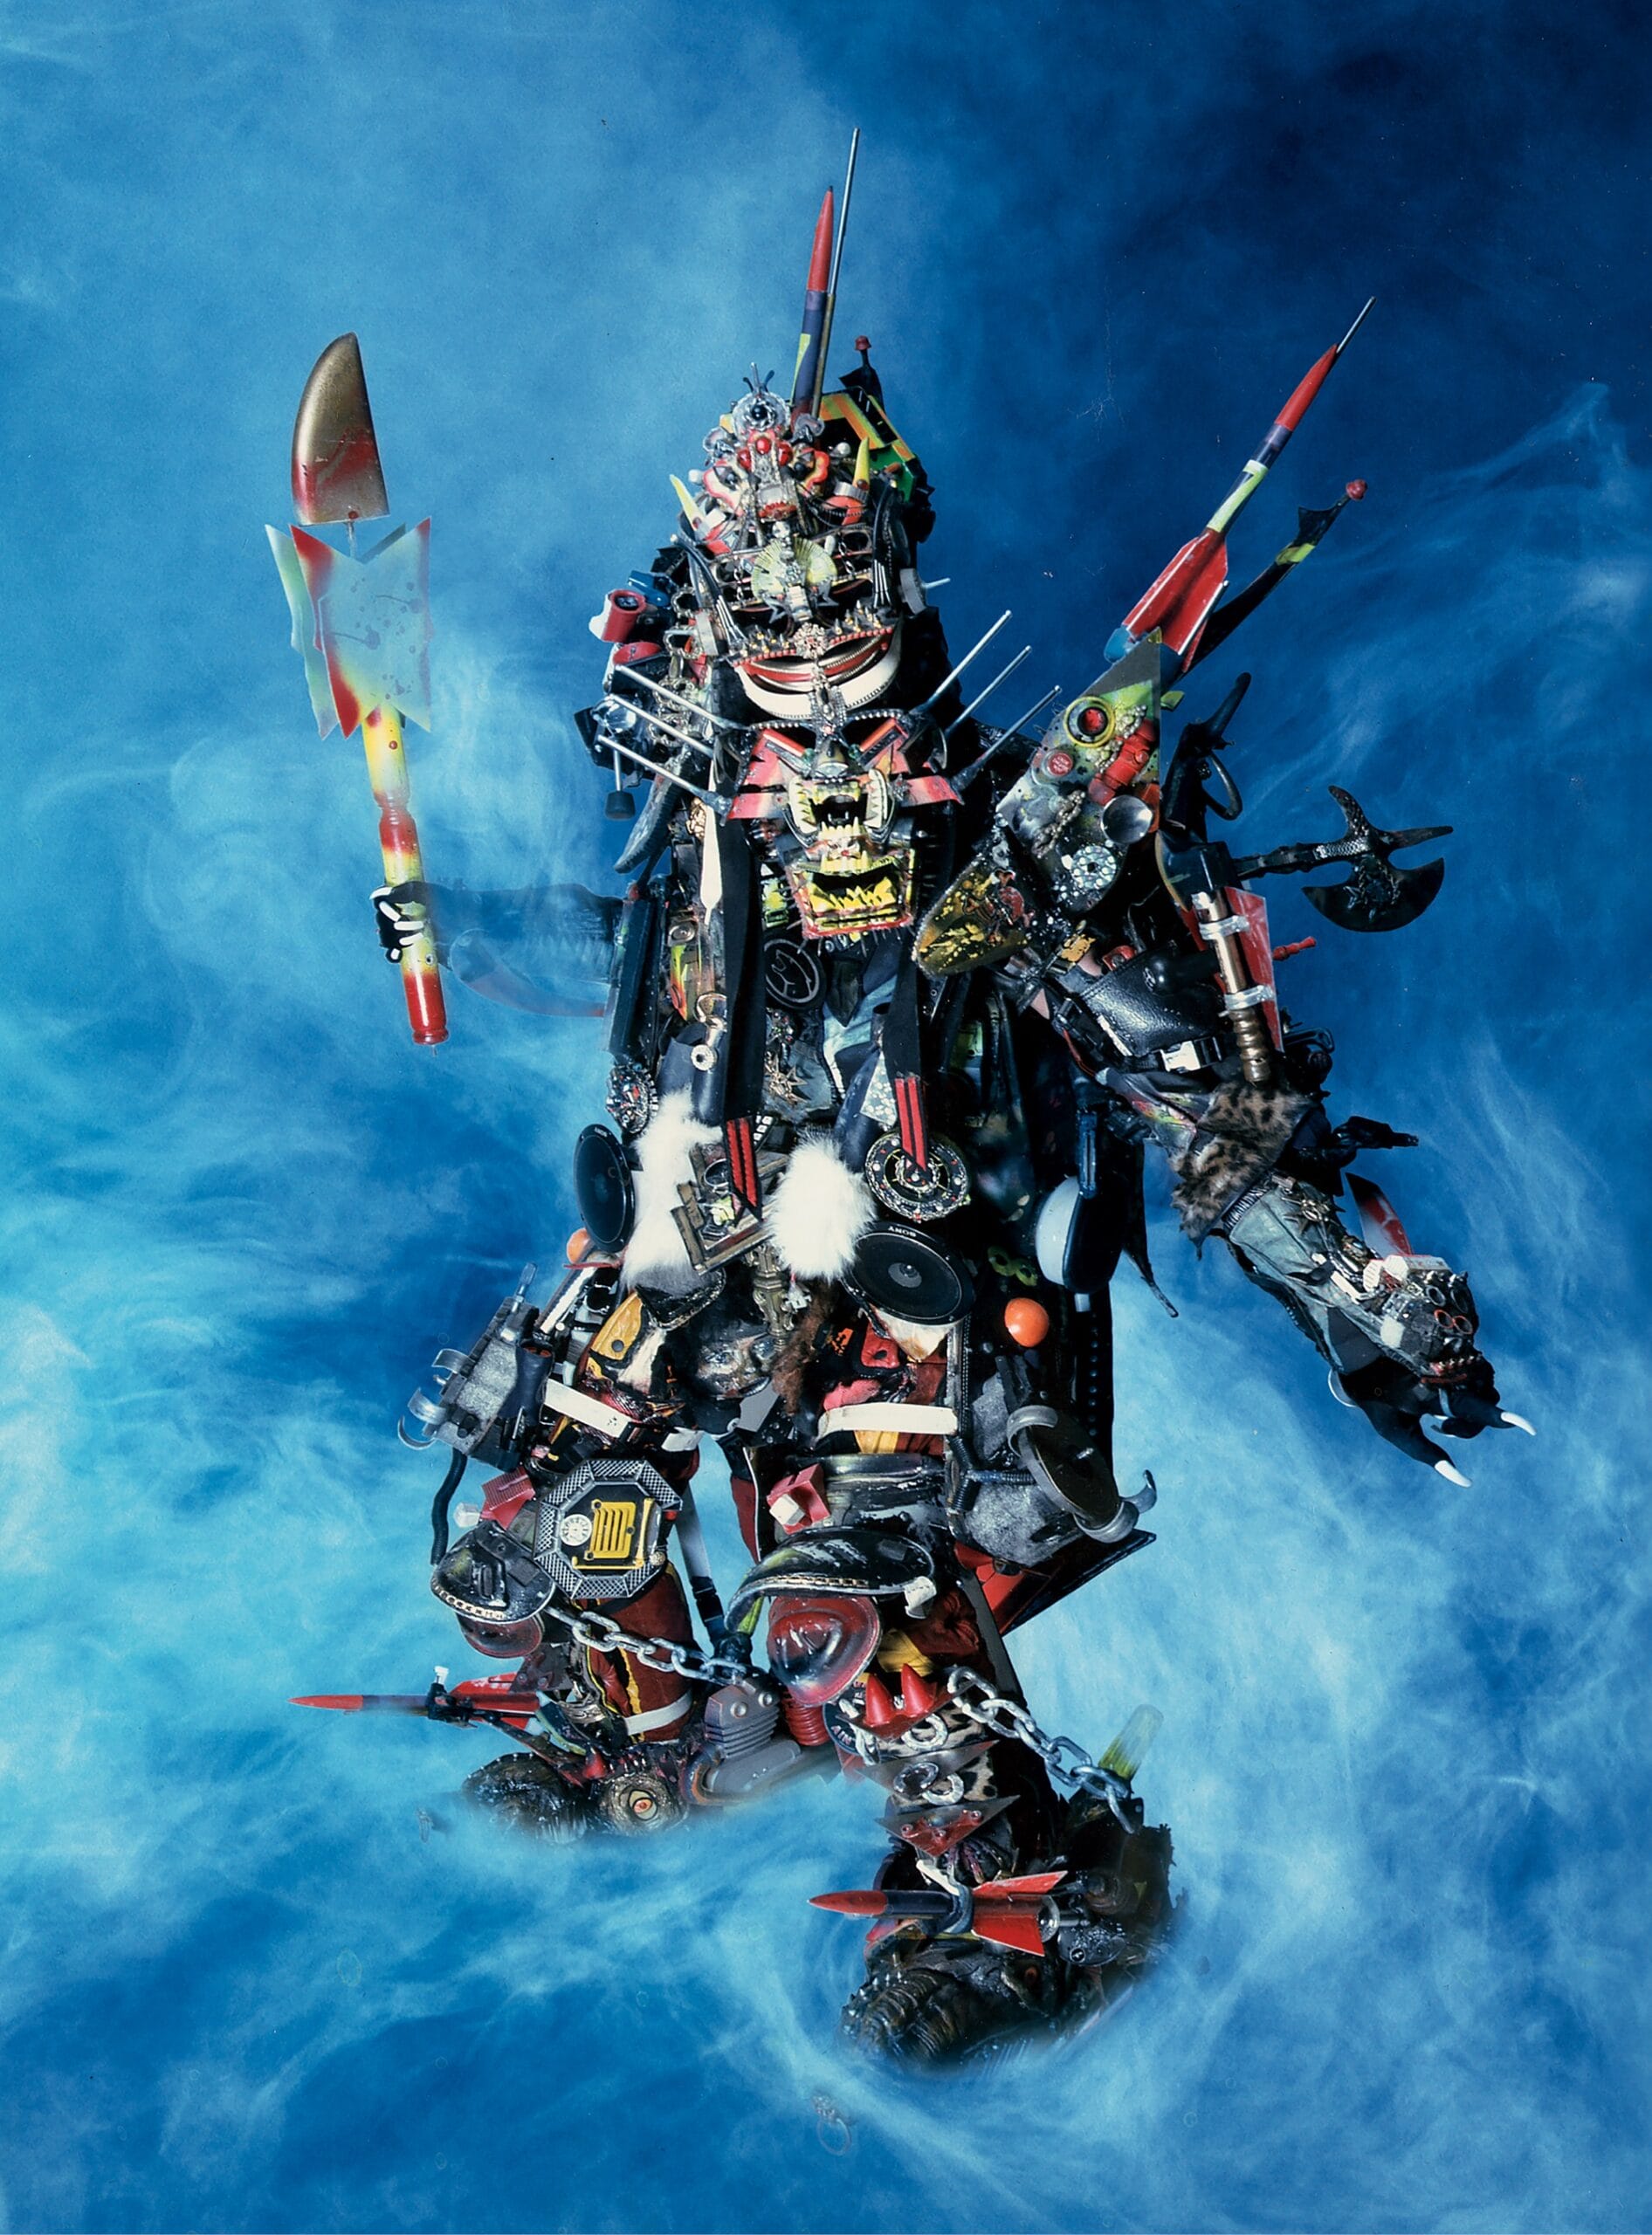 the artist Rammellzee in a futuristic costume, photographed on a swirling blue backdrop